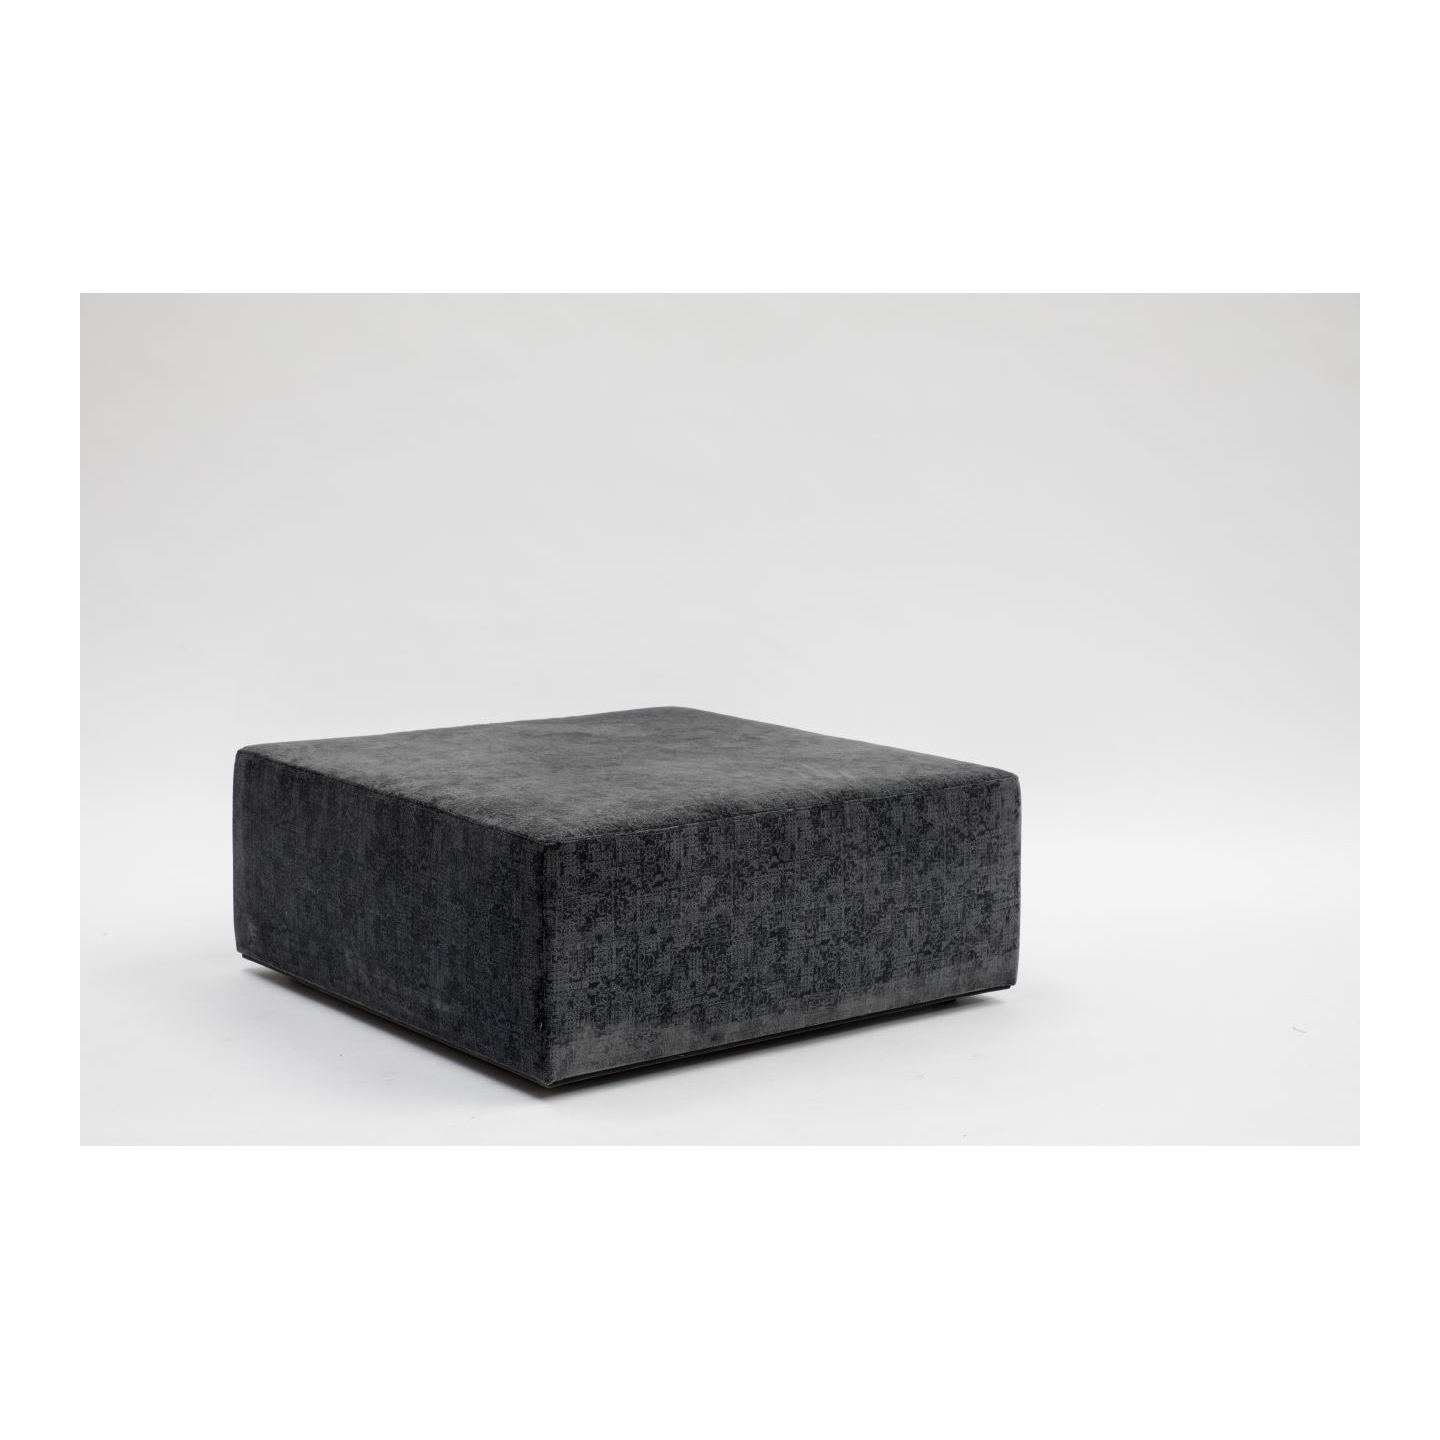 Haworth Buzzipouf in a charcoal colored fabric in a square shape